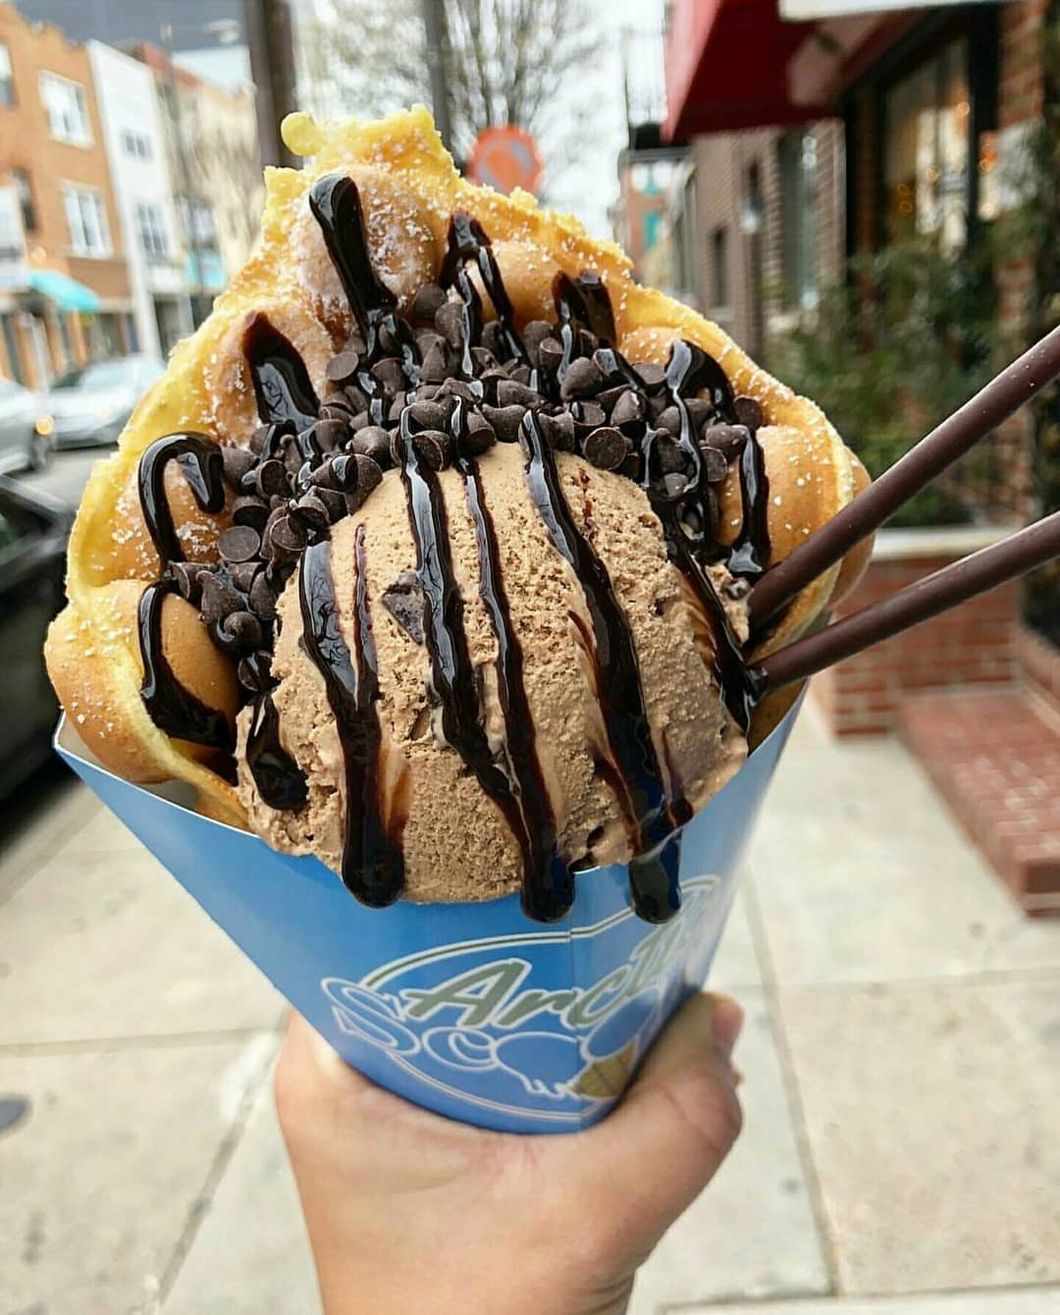 7 Ice Cream Shops In Philadelphia You Need To Visit Before Winter